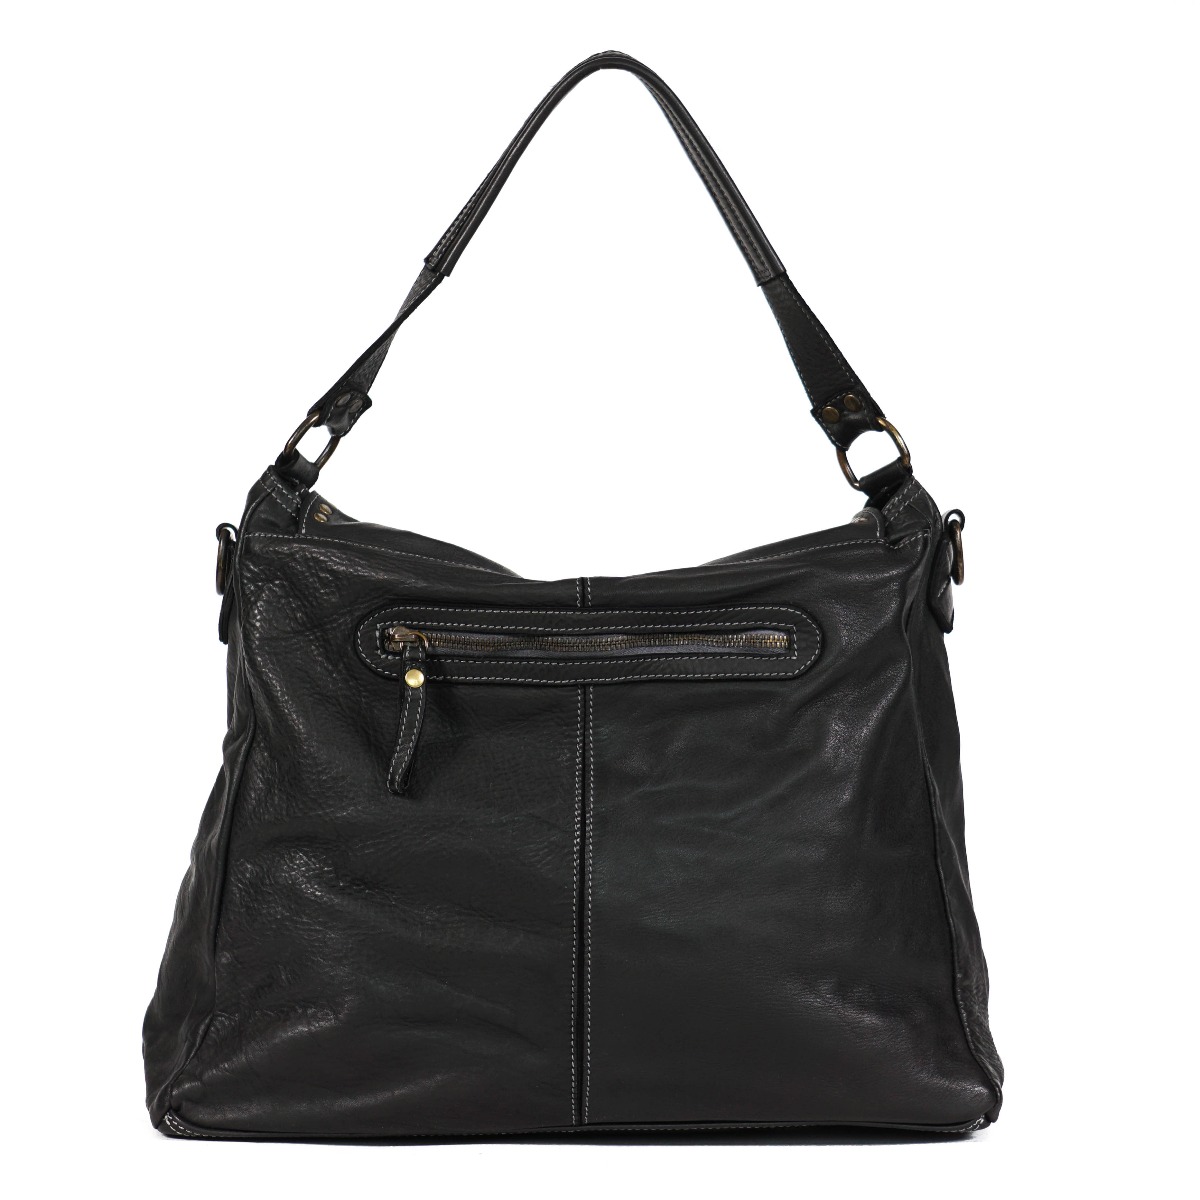 Black washed leather women messenger bag with studs